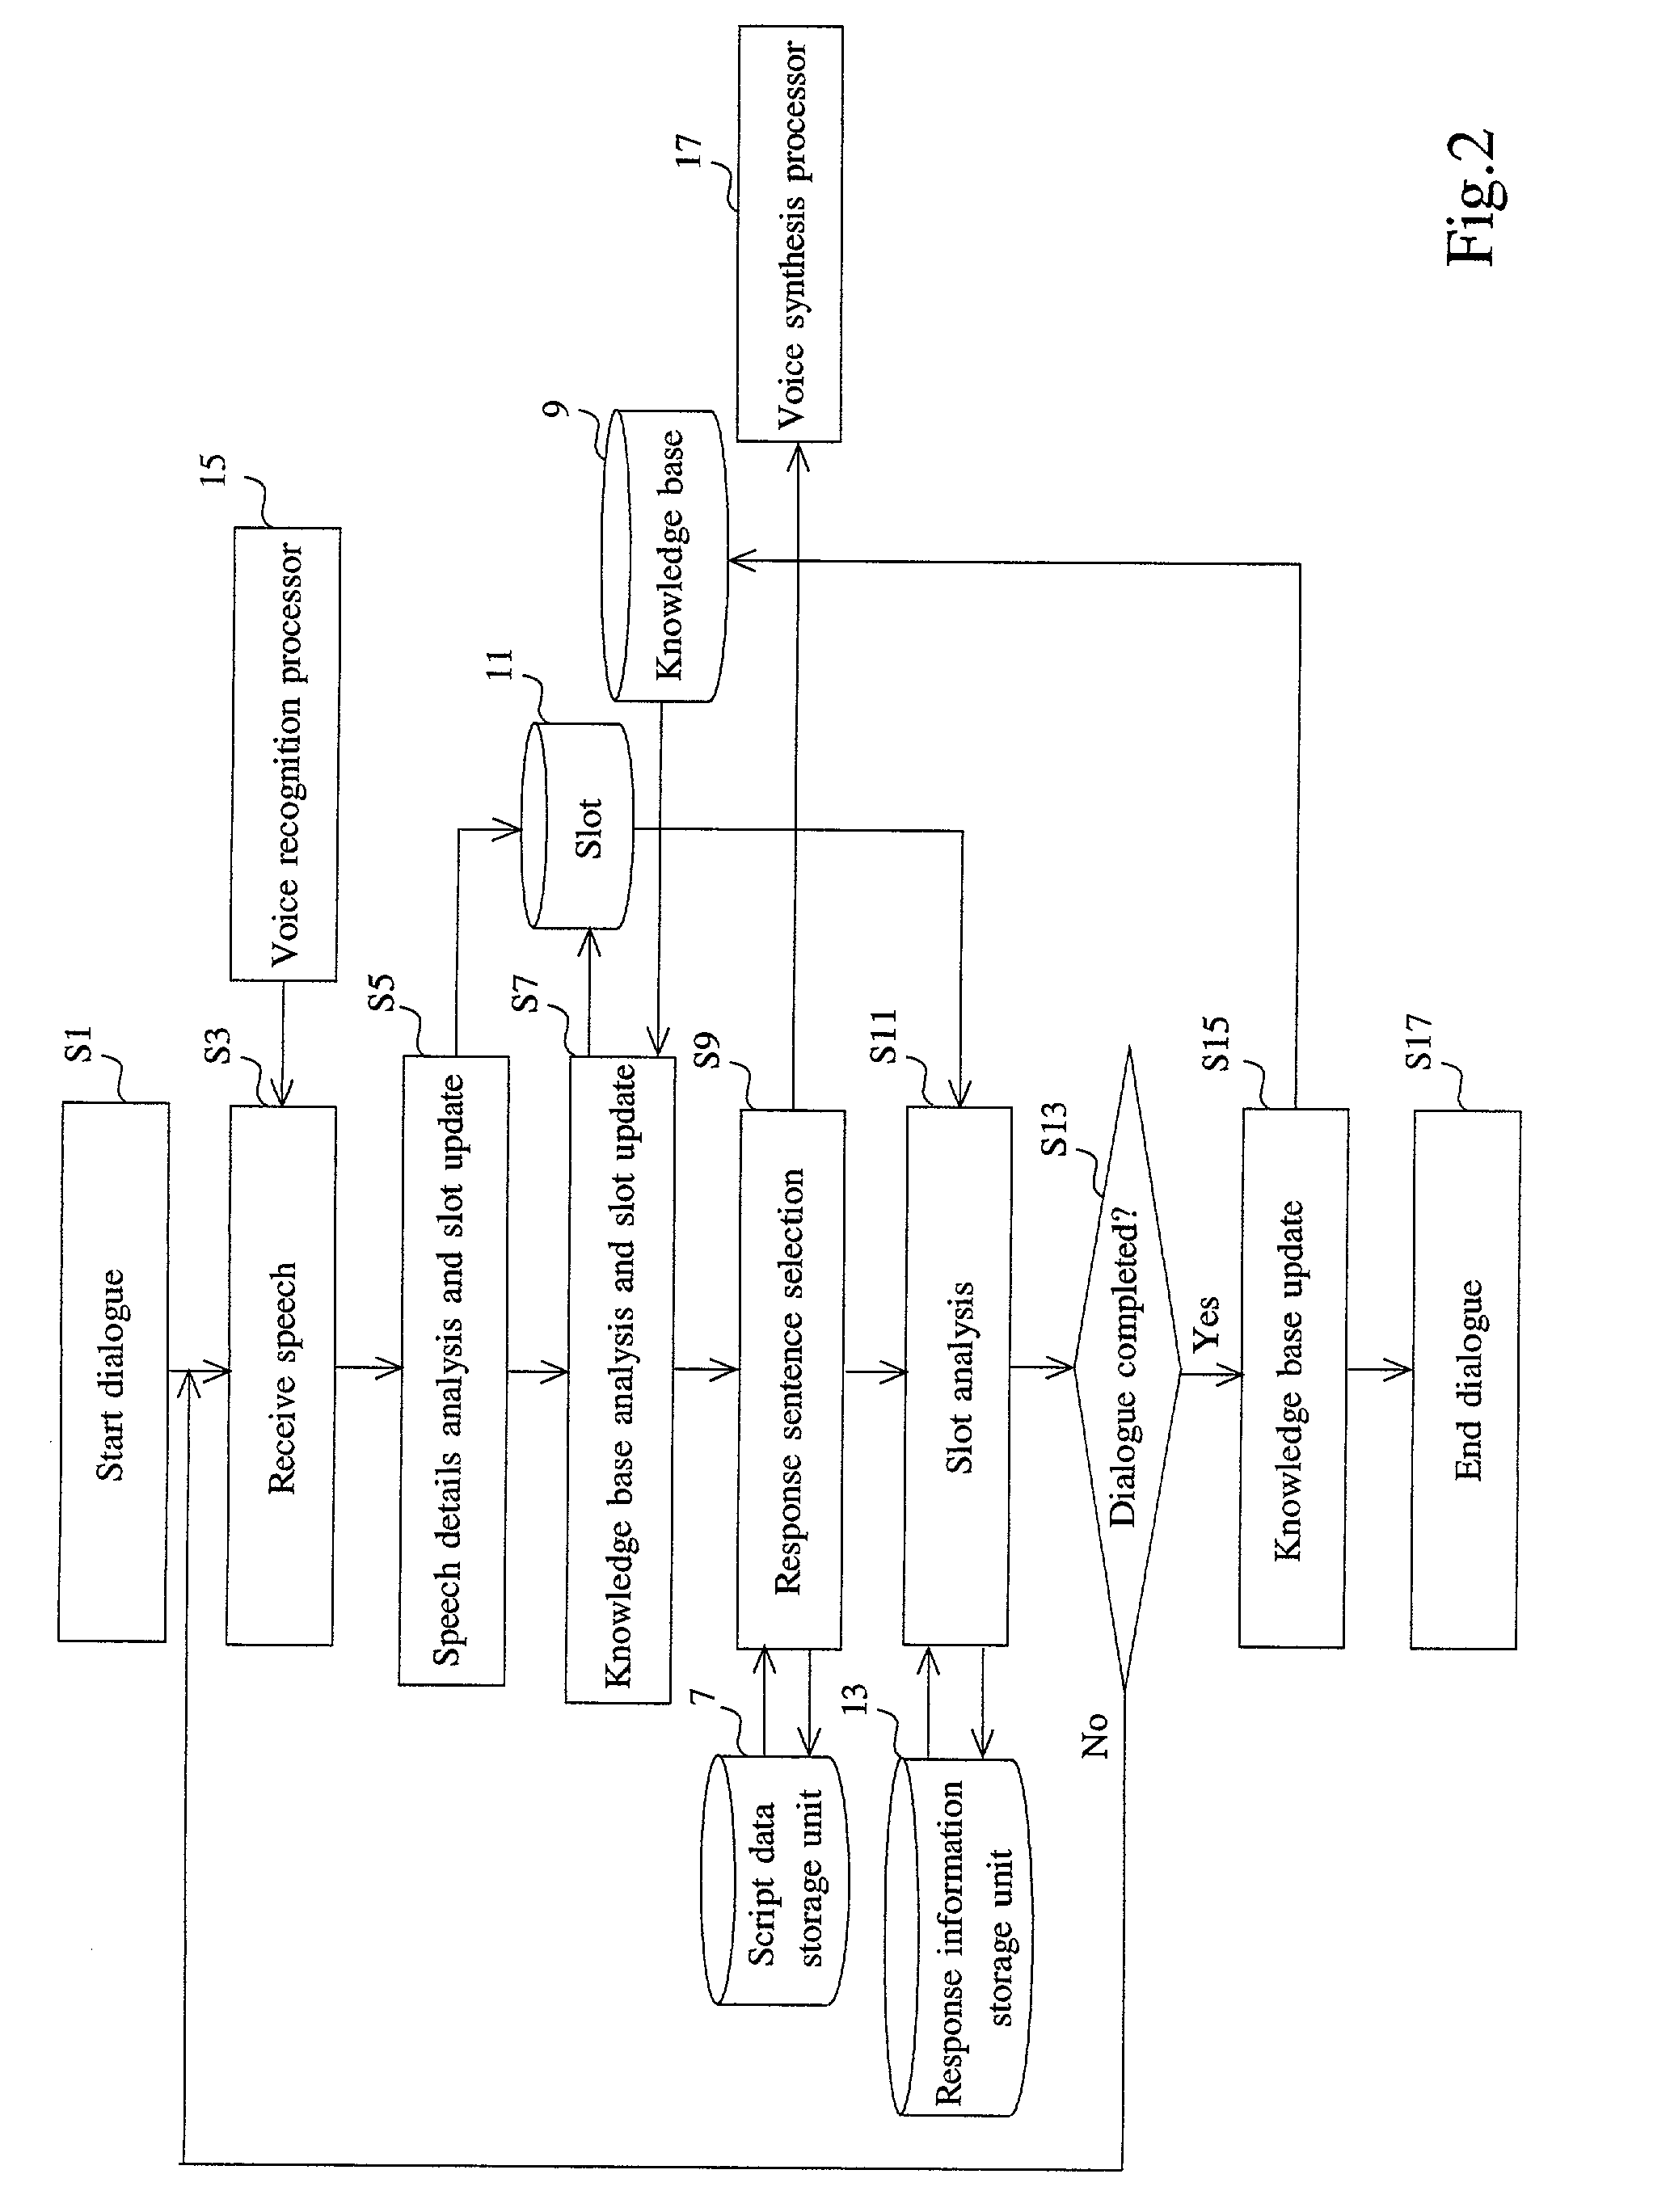 Dialogue processing system and method